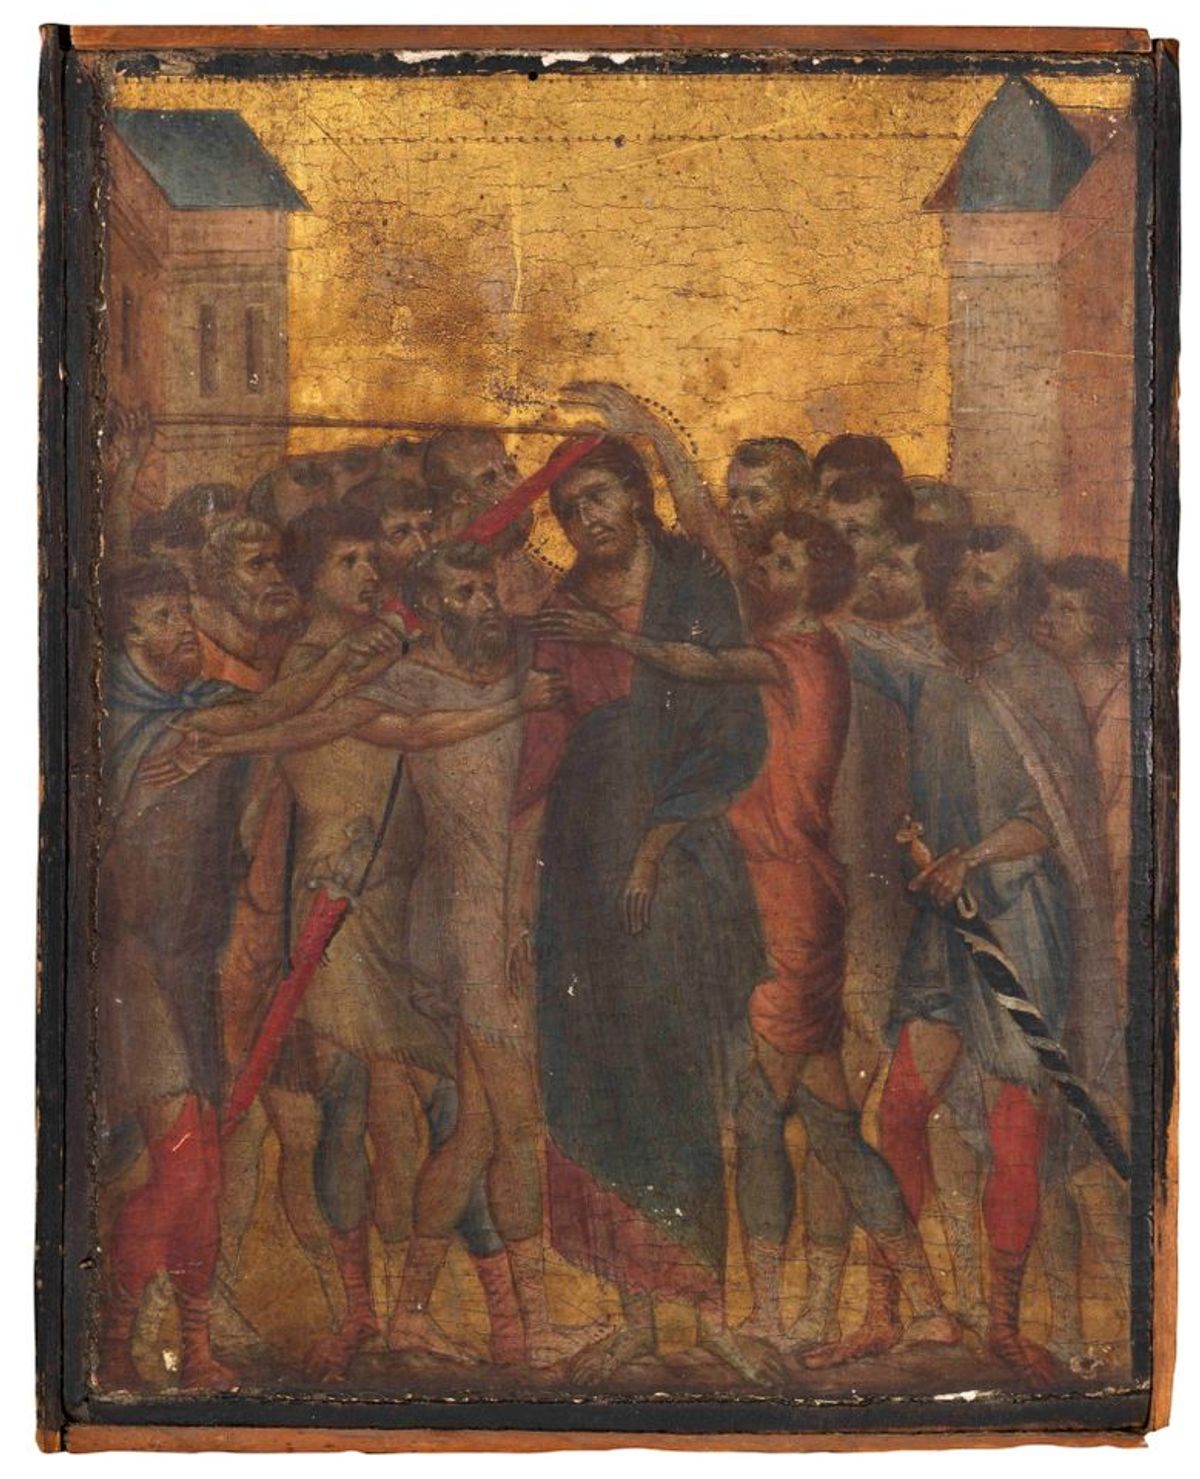 This small panel by the Florentine artist Cimabue was sold  for €24.1m Courtesy of Actéon and Eric Turquin